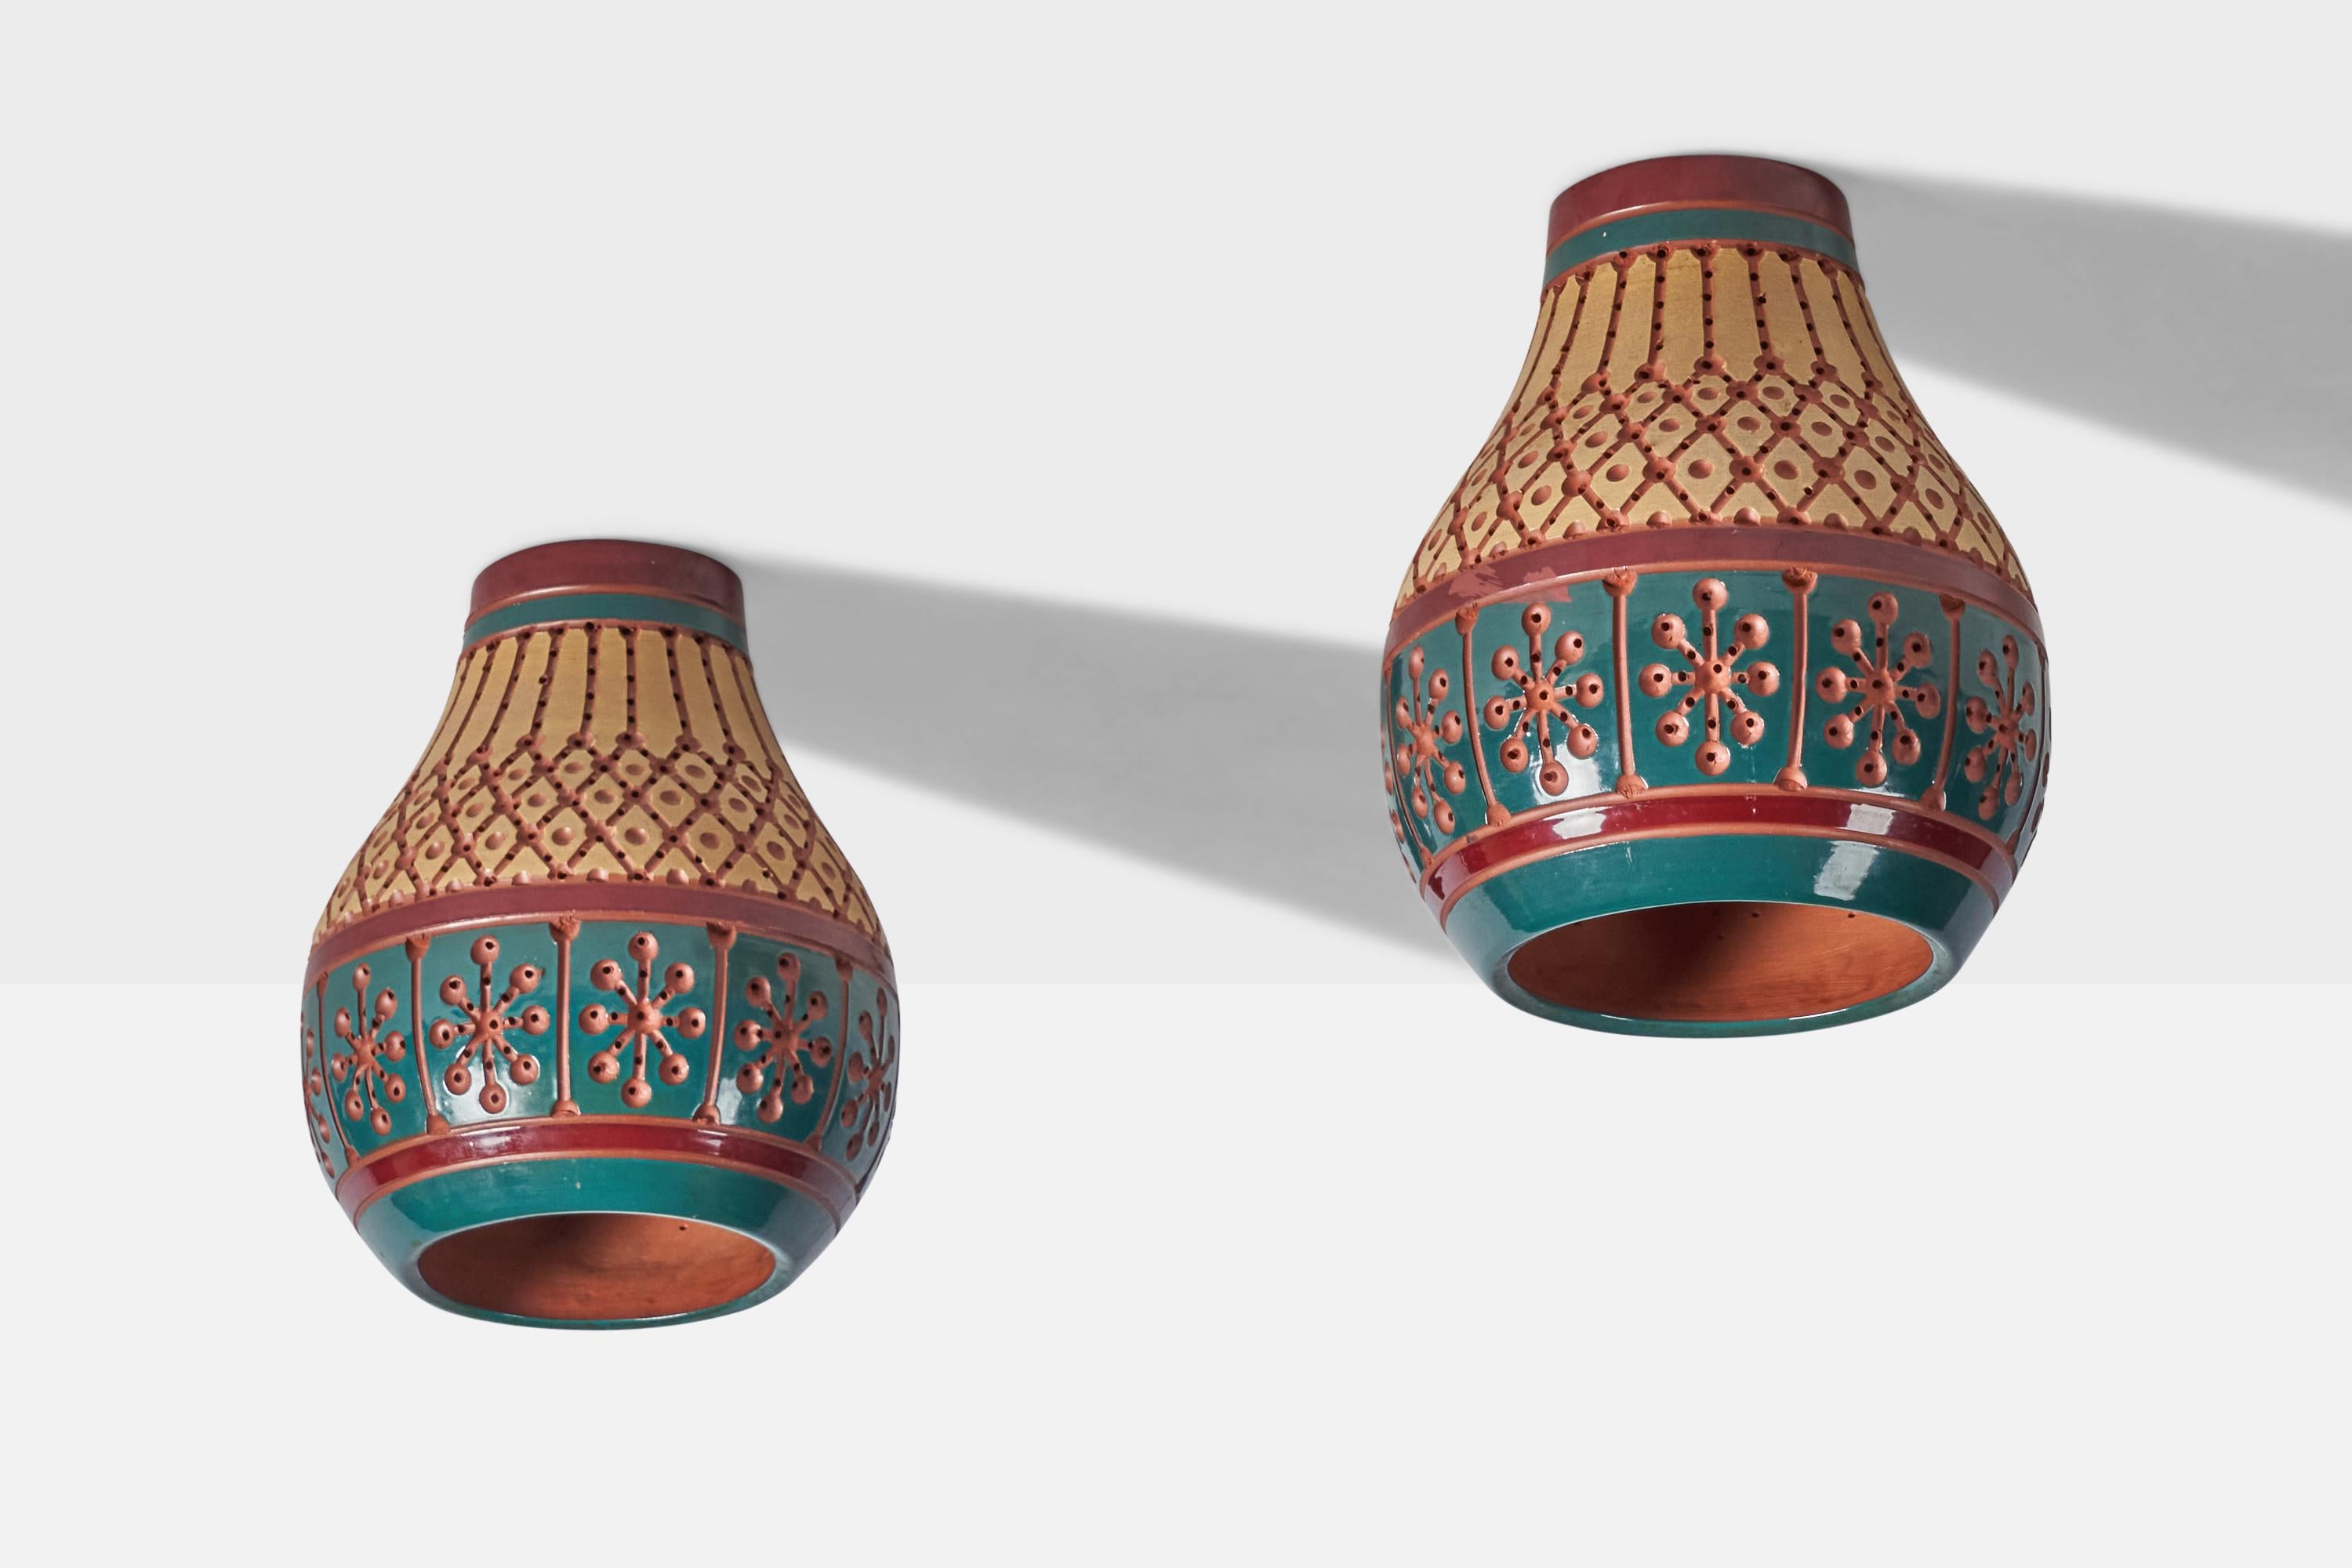 A pair of hand-painted yellow, red and blue ceramic flush mounts or pendant lights, designed and produced by Martha & Beaumont Mood, San Antonio, Texas, USA, 1970s.

Overall Dimensions (inches): 12.5” H x 11” Diameter
Bulb Specifications: E-26